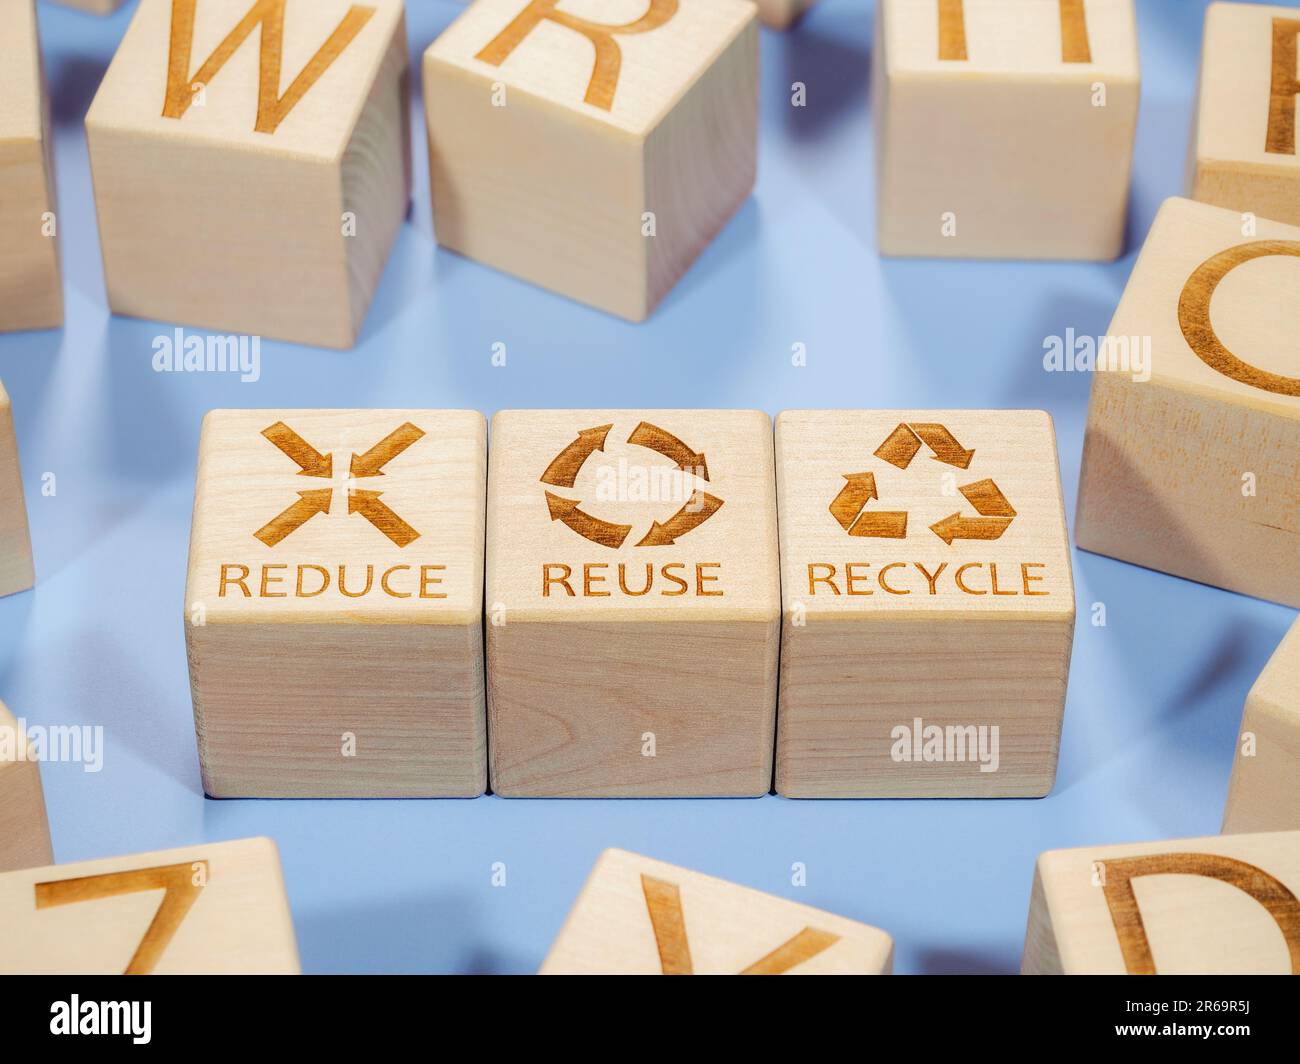 Reduce, Reuse and Recycle symbols as a modern model of business strategy Stock Photo